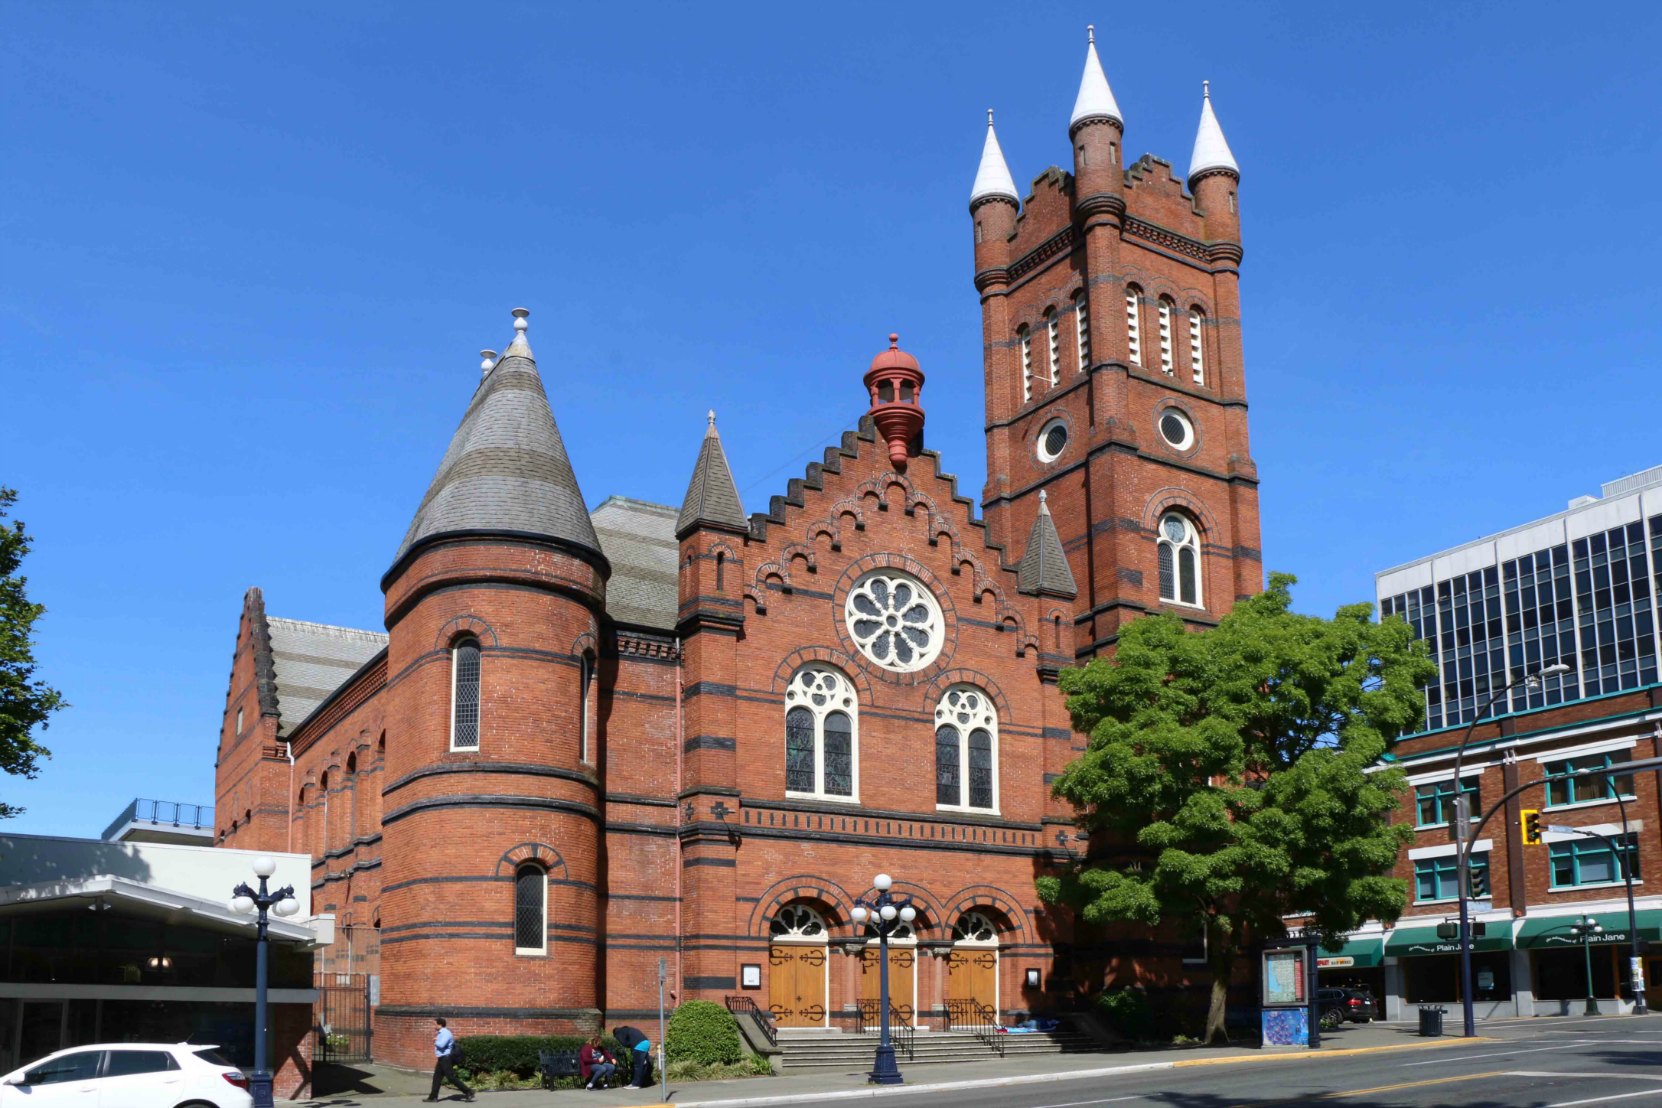 St. Andrew's Presbyterian Church, built in 1889-1890 by architect L. Butress Trimen. (photo by Victoria Online Sightseeing Tours)